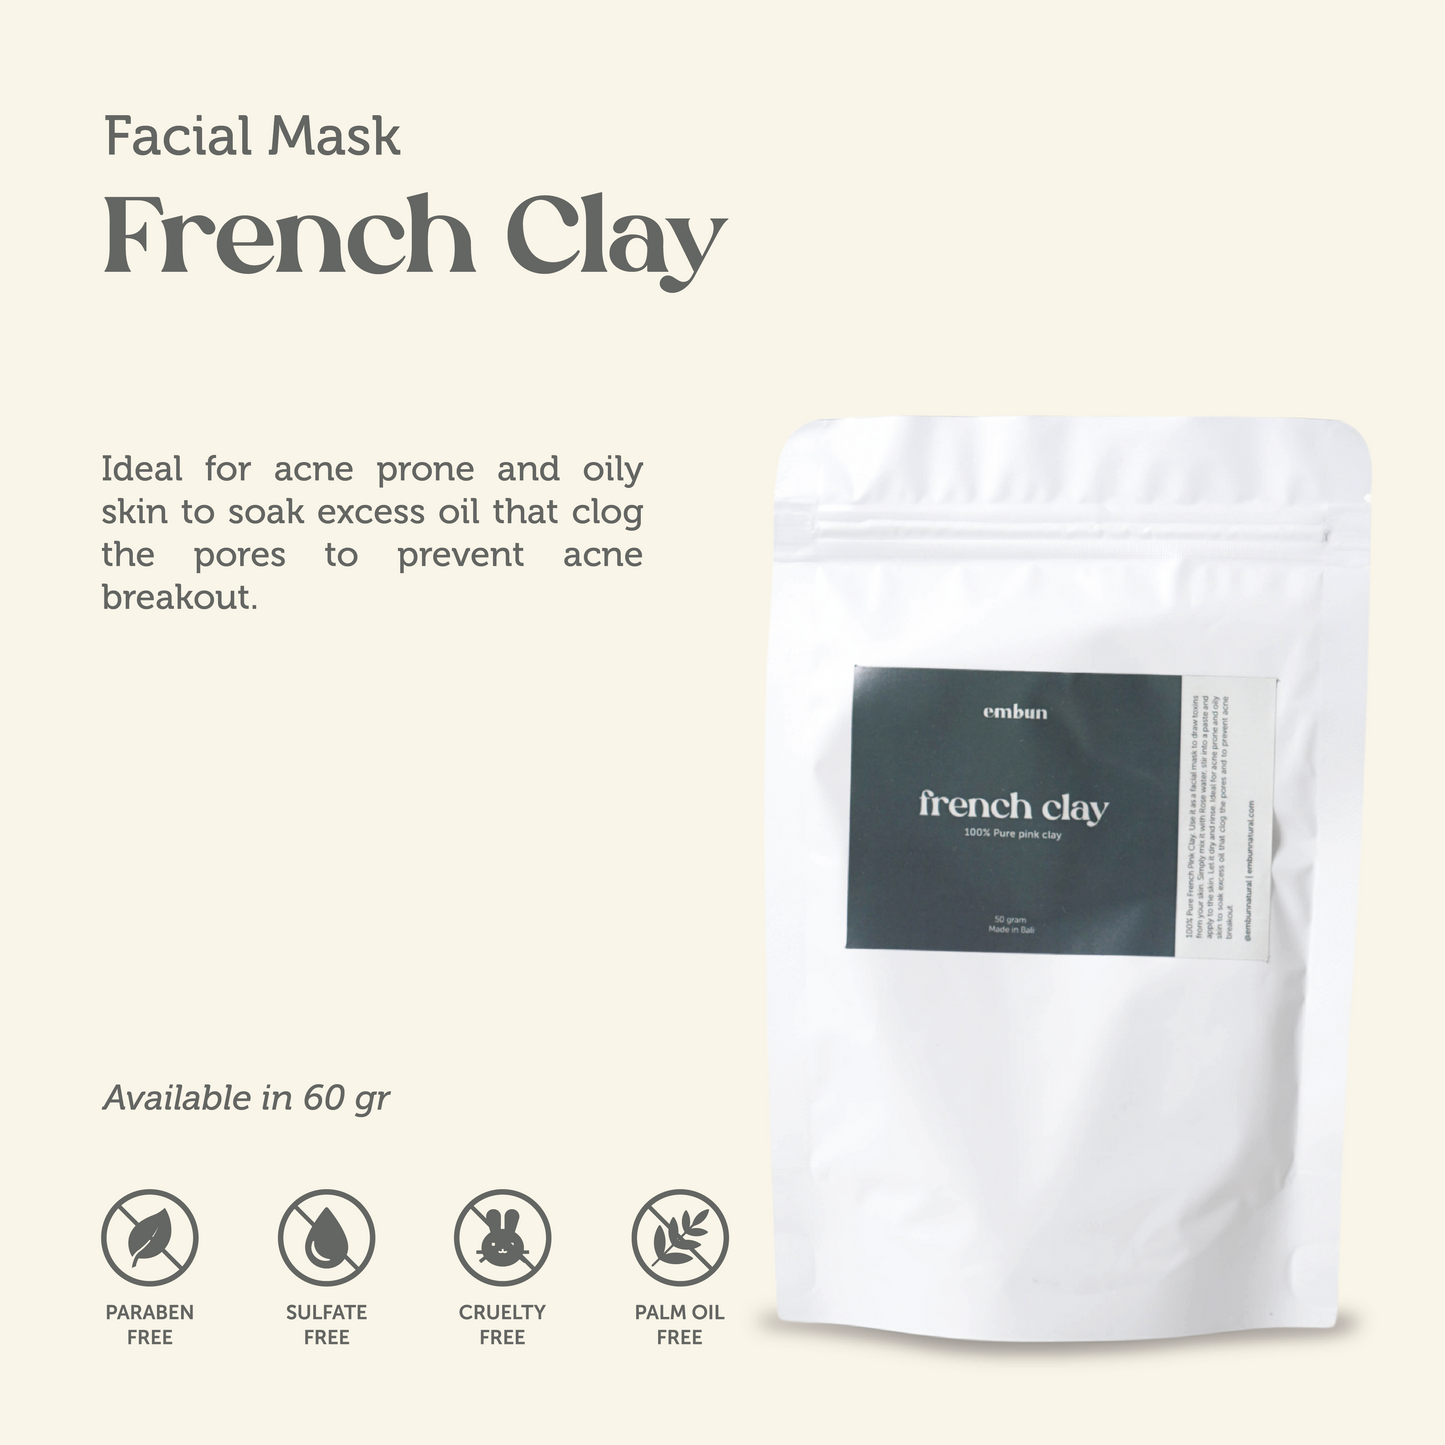 Facial Mask French Clay 60 gr